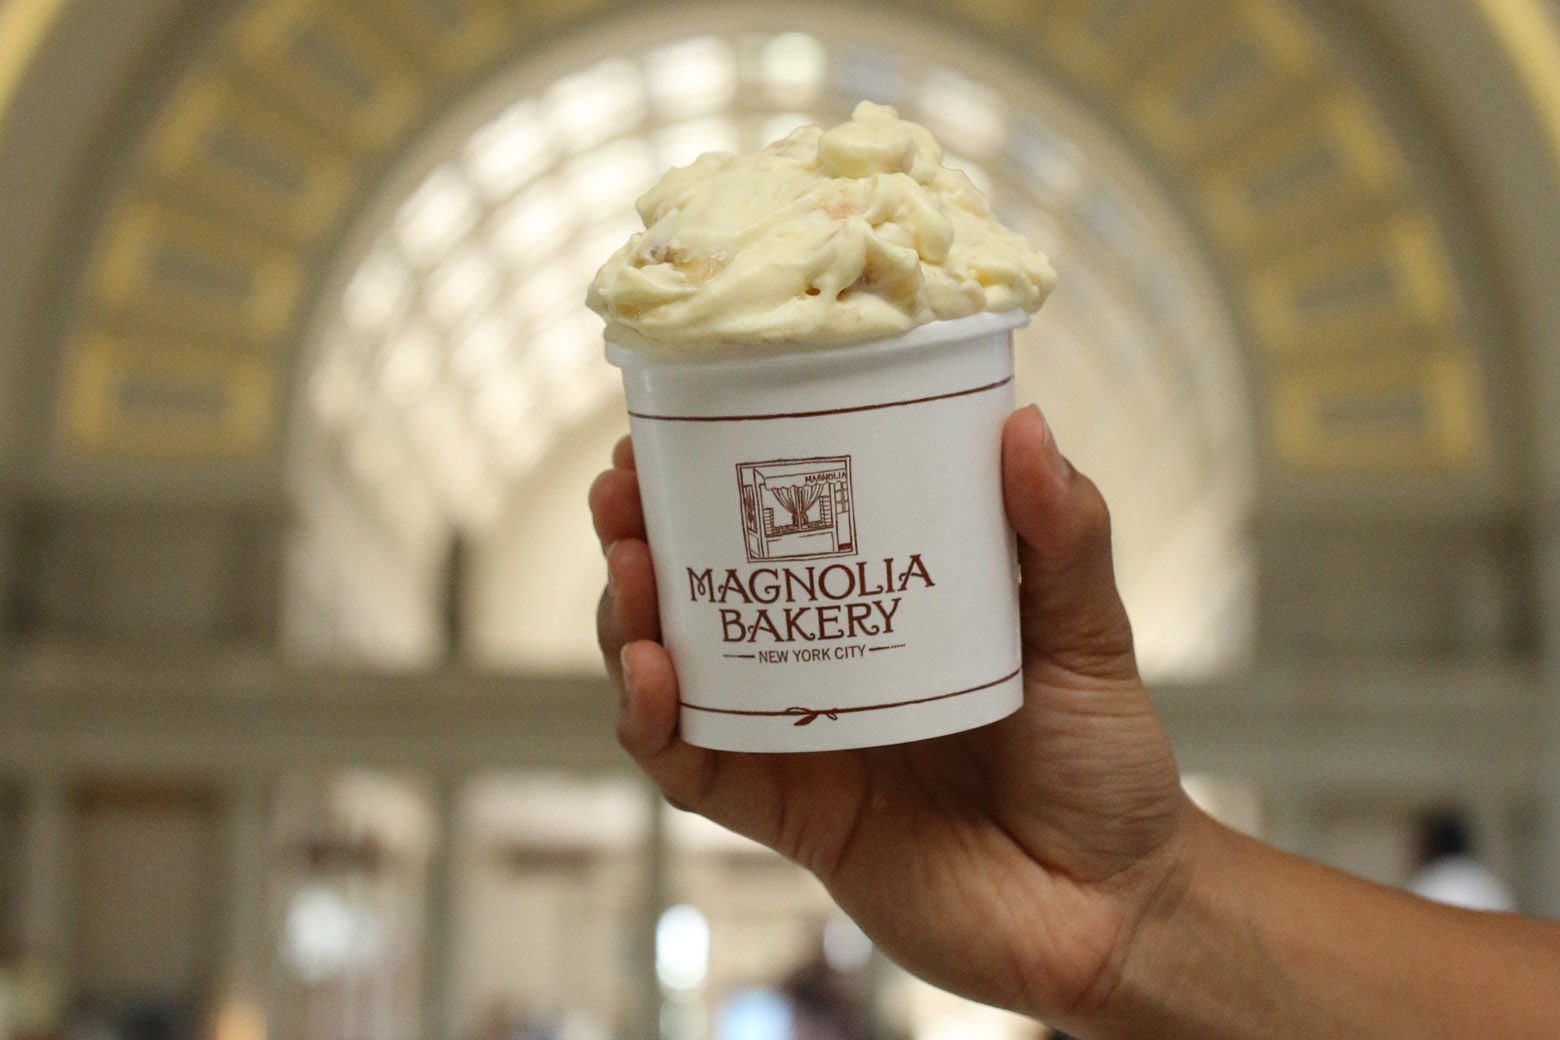 New York's Magnolia Bakery, often credited with starting the cupcake craze, will open a D.C. outpost at Union Station Sept. 10. (Courtesy Magnolia Bakery)